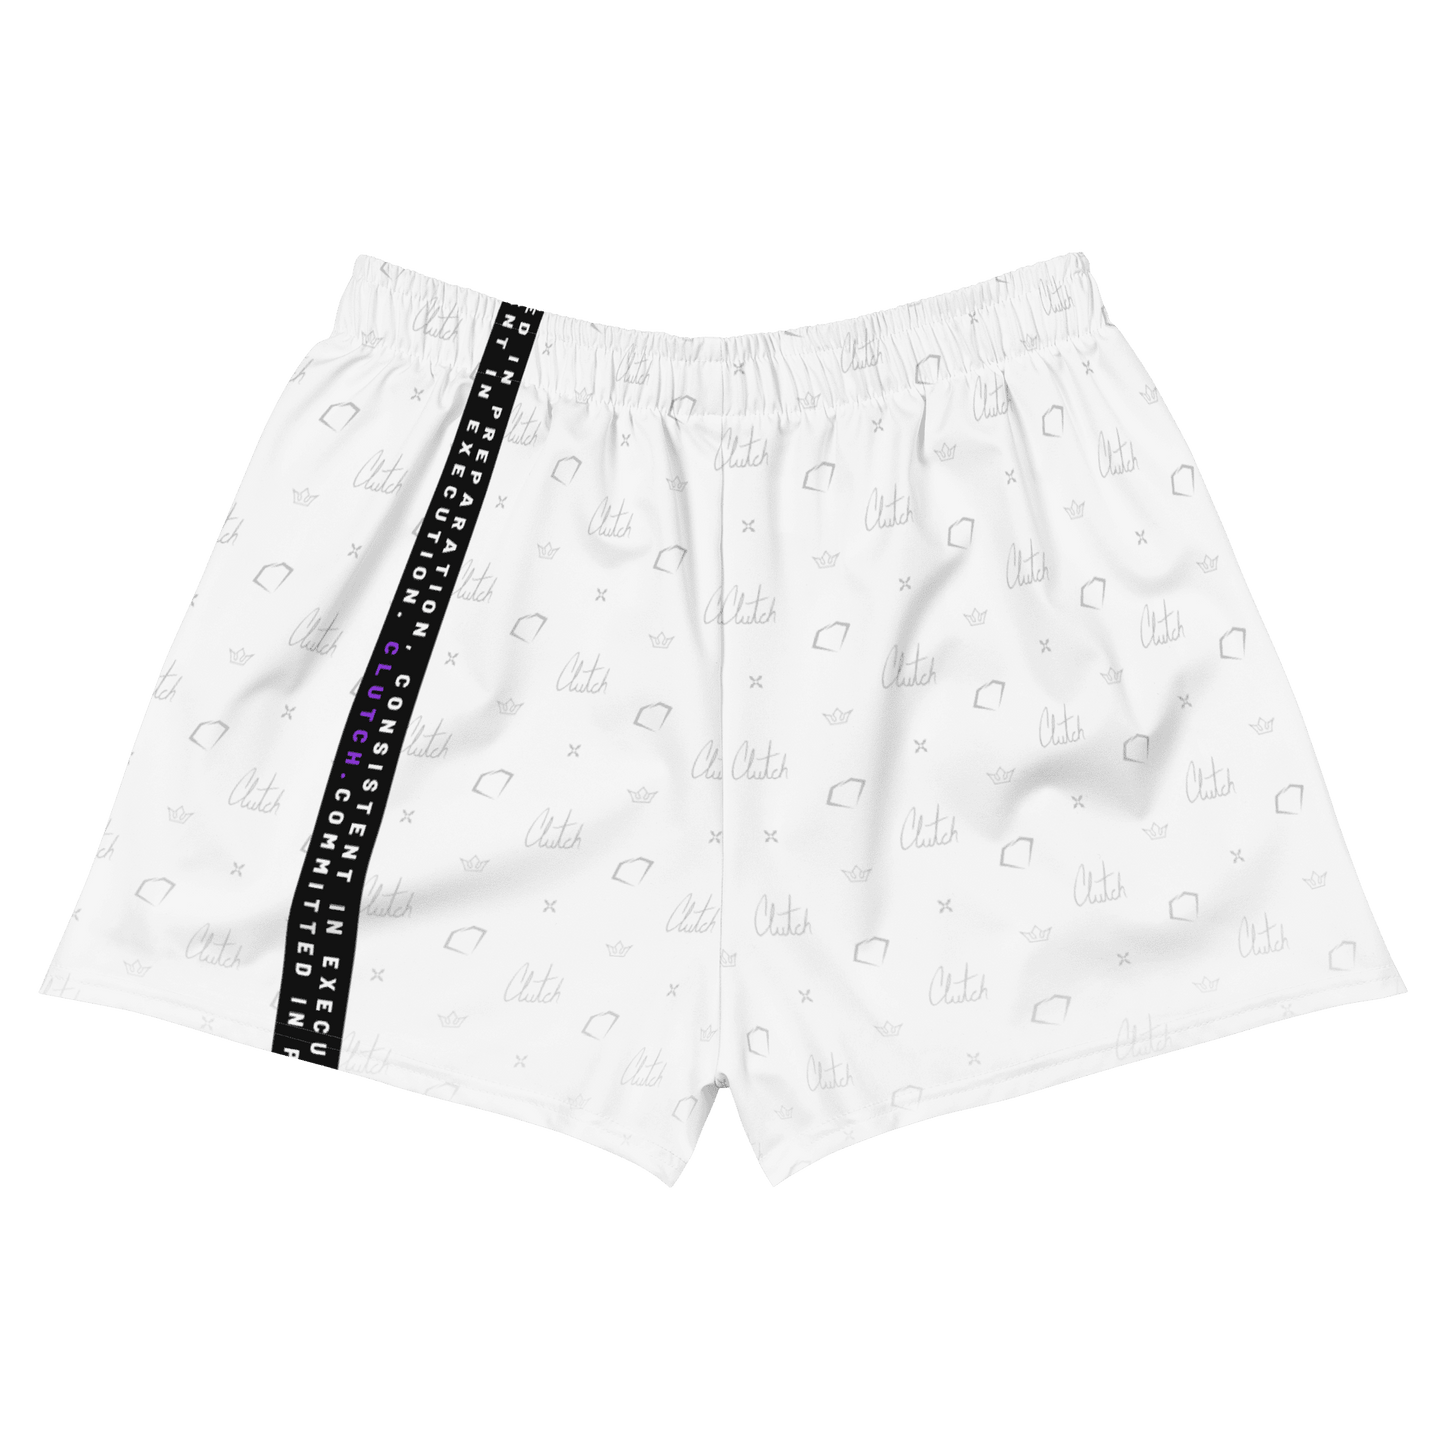 ICONIC | Women’s Performance Shorts - White - Clutch -